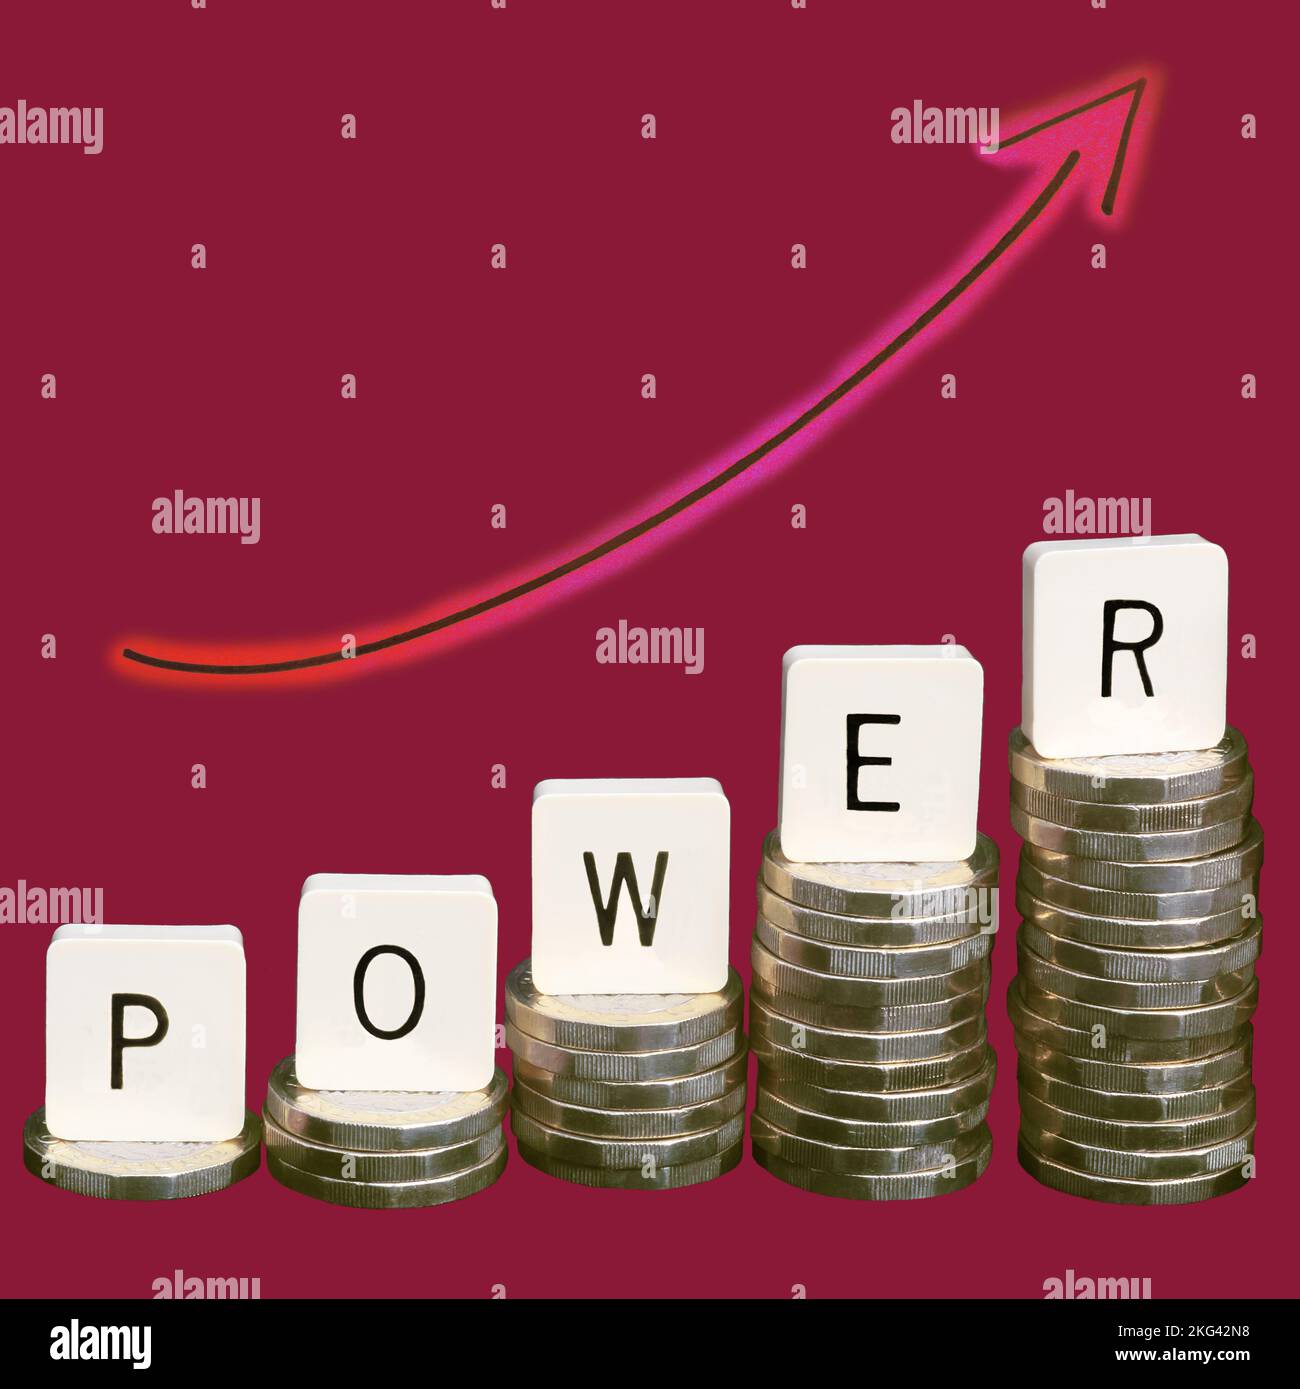 Arrangement of five stacks of one pound coins in increasing heights with capital letters spelling the word POWER on top of the stacks, illustrating a Stock Photo